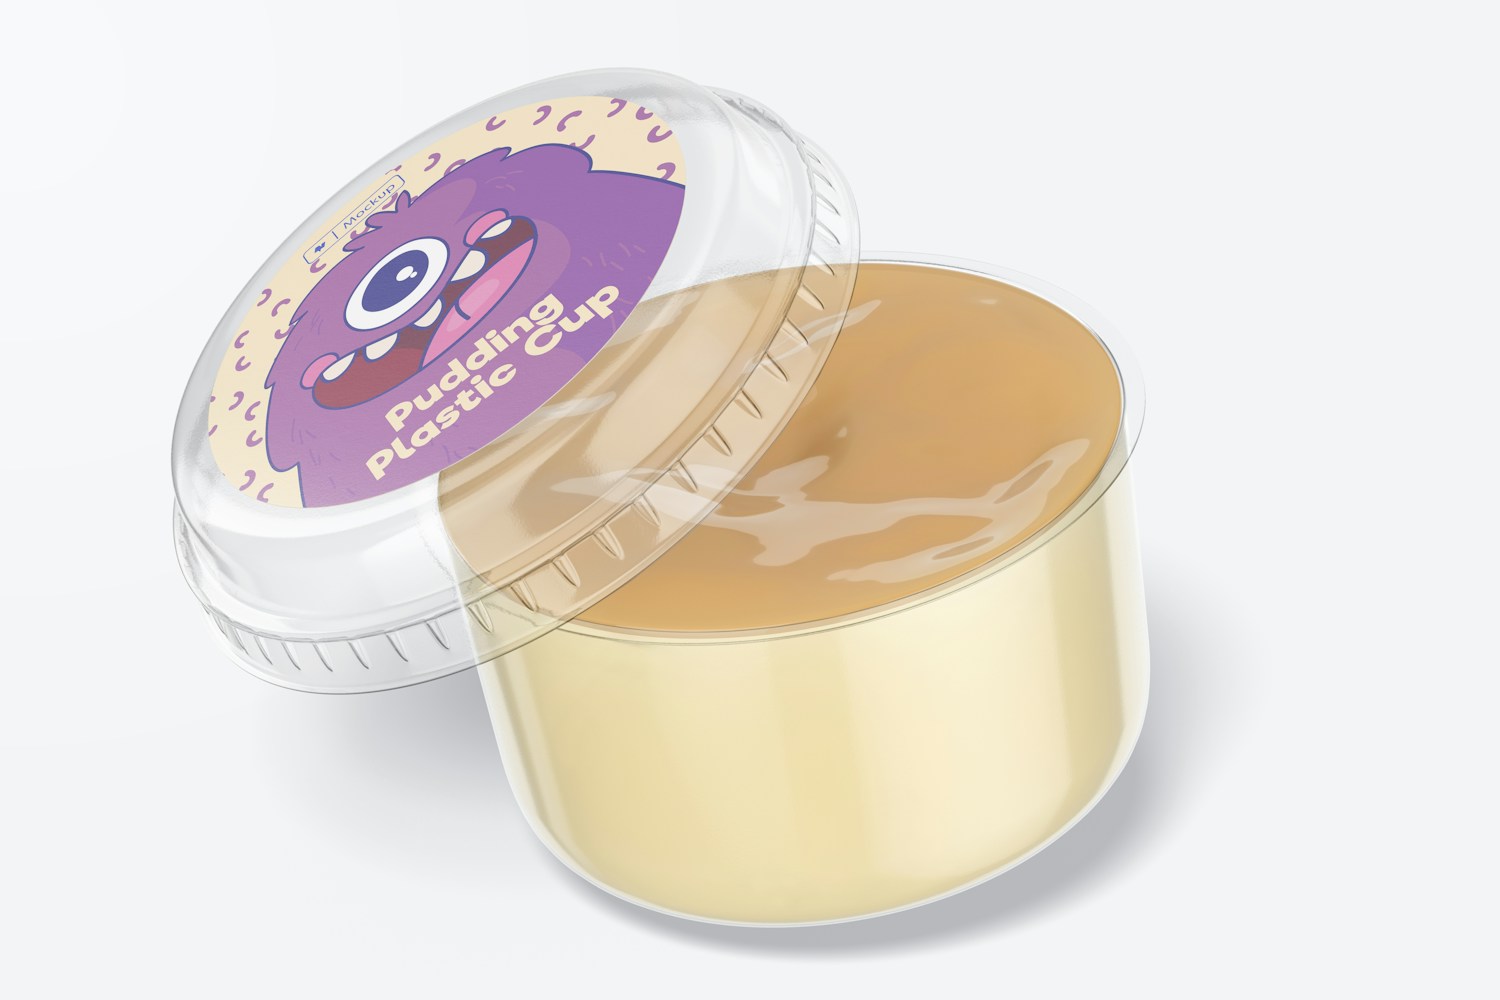 Pudding Plastic Cup Mockup, Opened